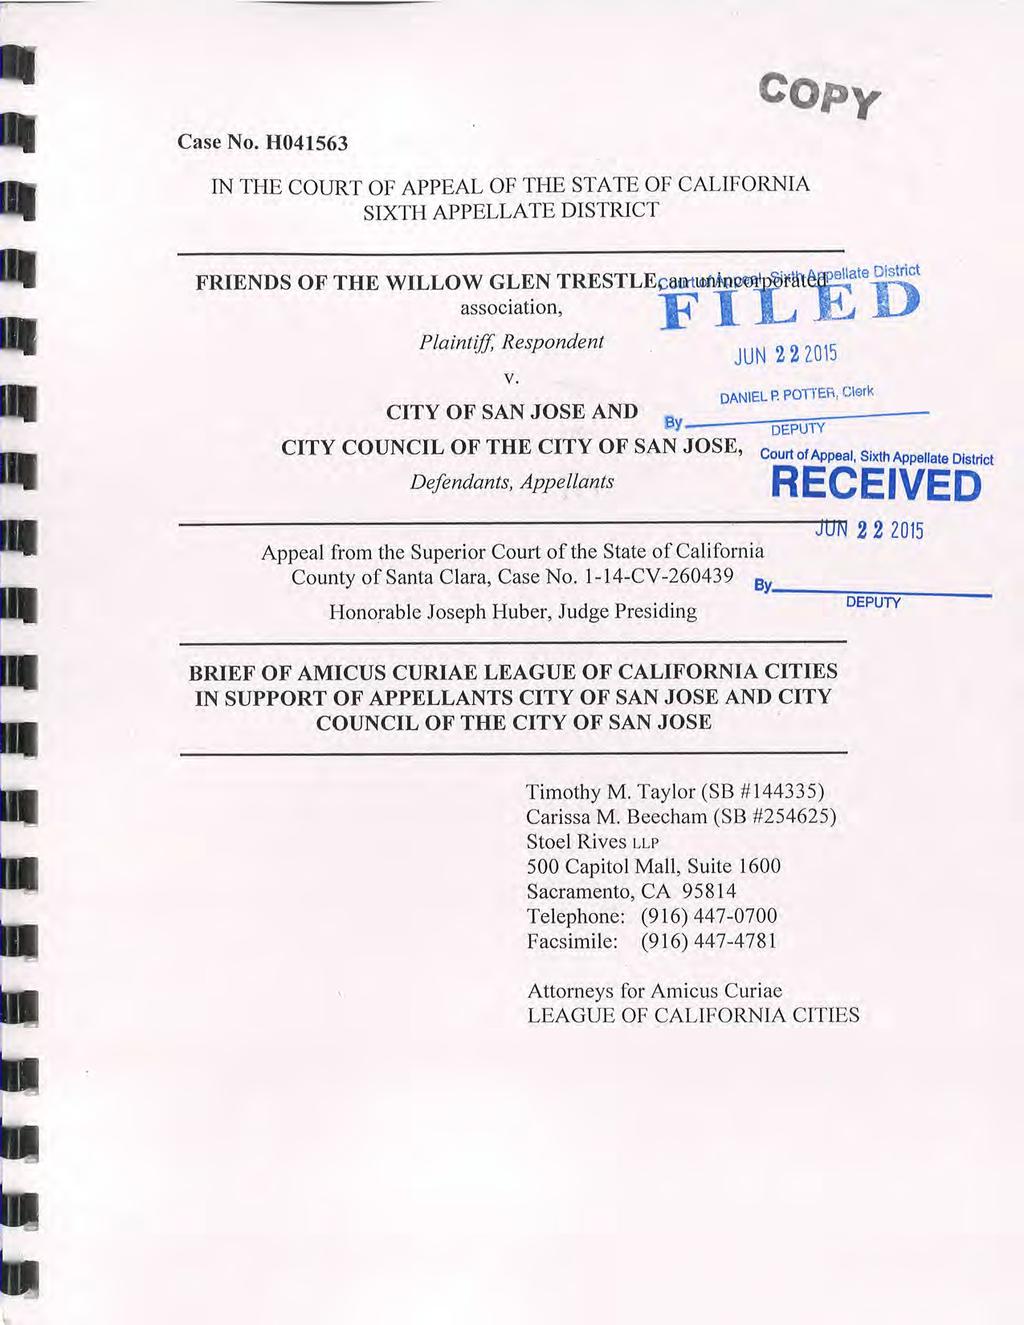 Case No. 11041563 COpy IN THE COURT OF APPEAL OF THE STATE OF CALIFORNIA SIXTH APPELLATE DISTRICT FRIENDS OF THE WILLOW GLEN TRESTLEoettean litttikellate 1.